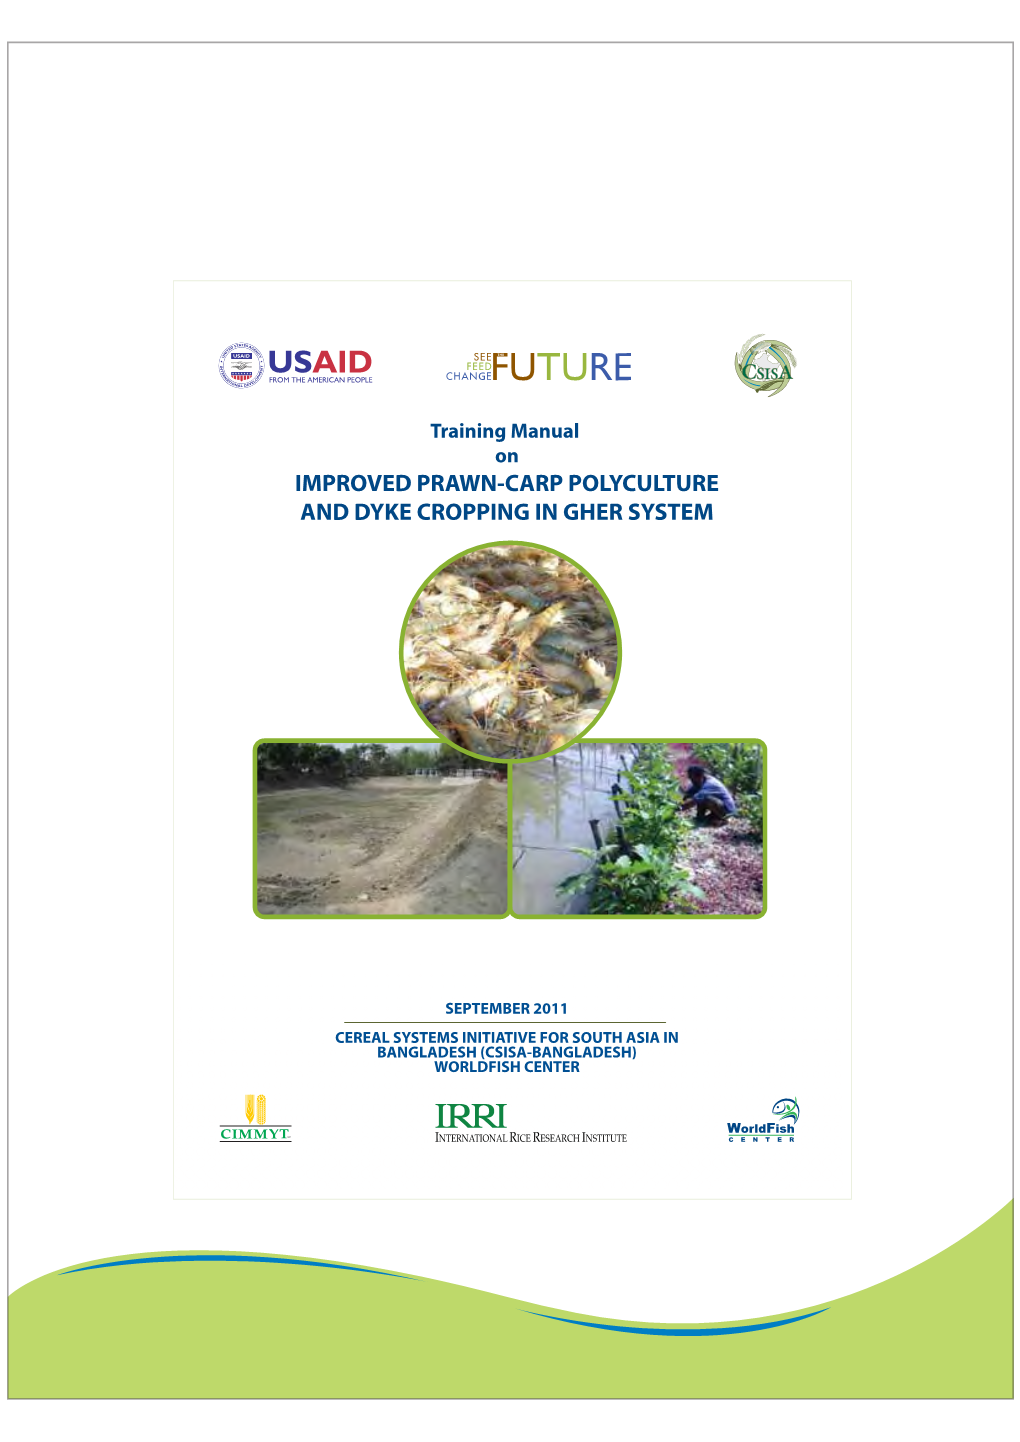 Improved Prawn-Carp Polyculture and Dyke Cropping in Gher System